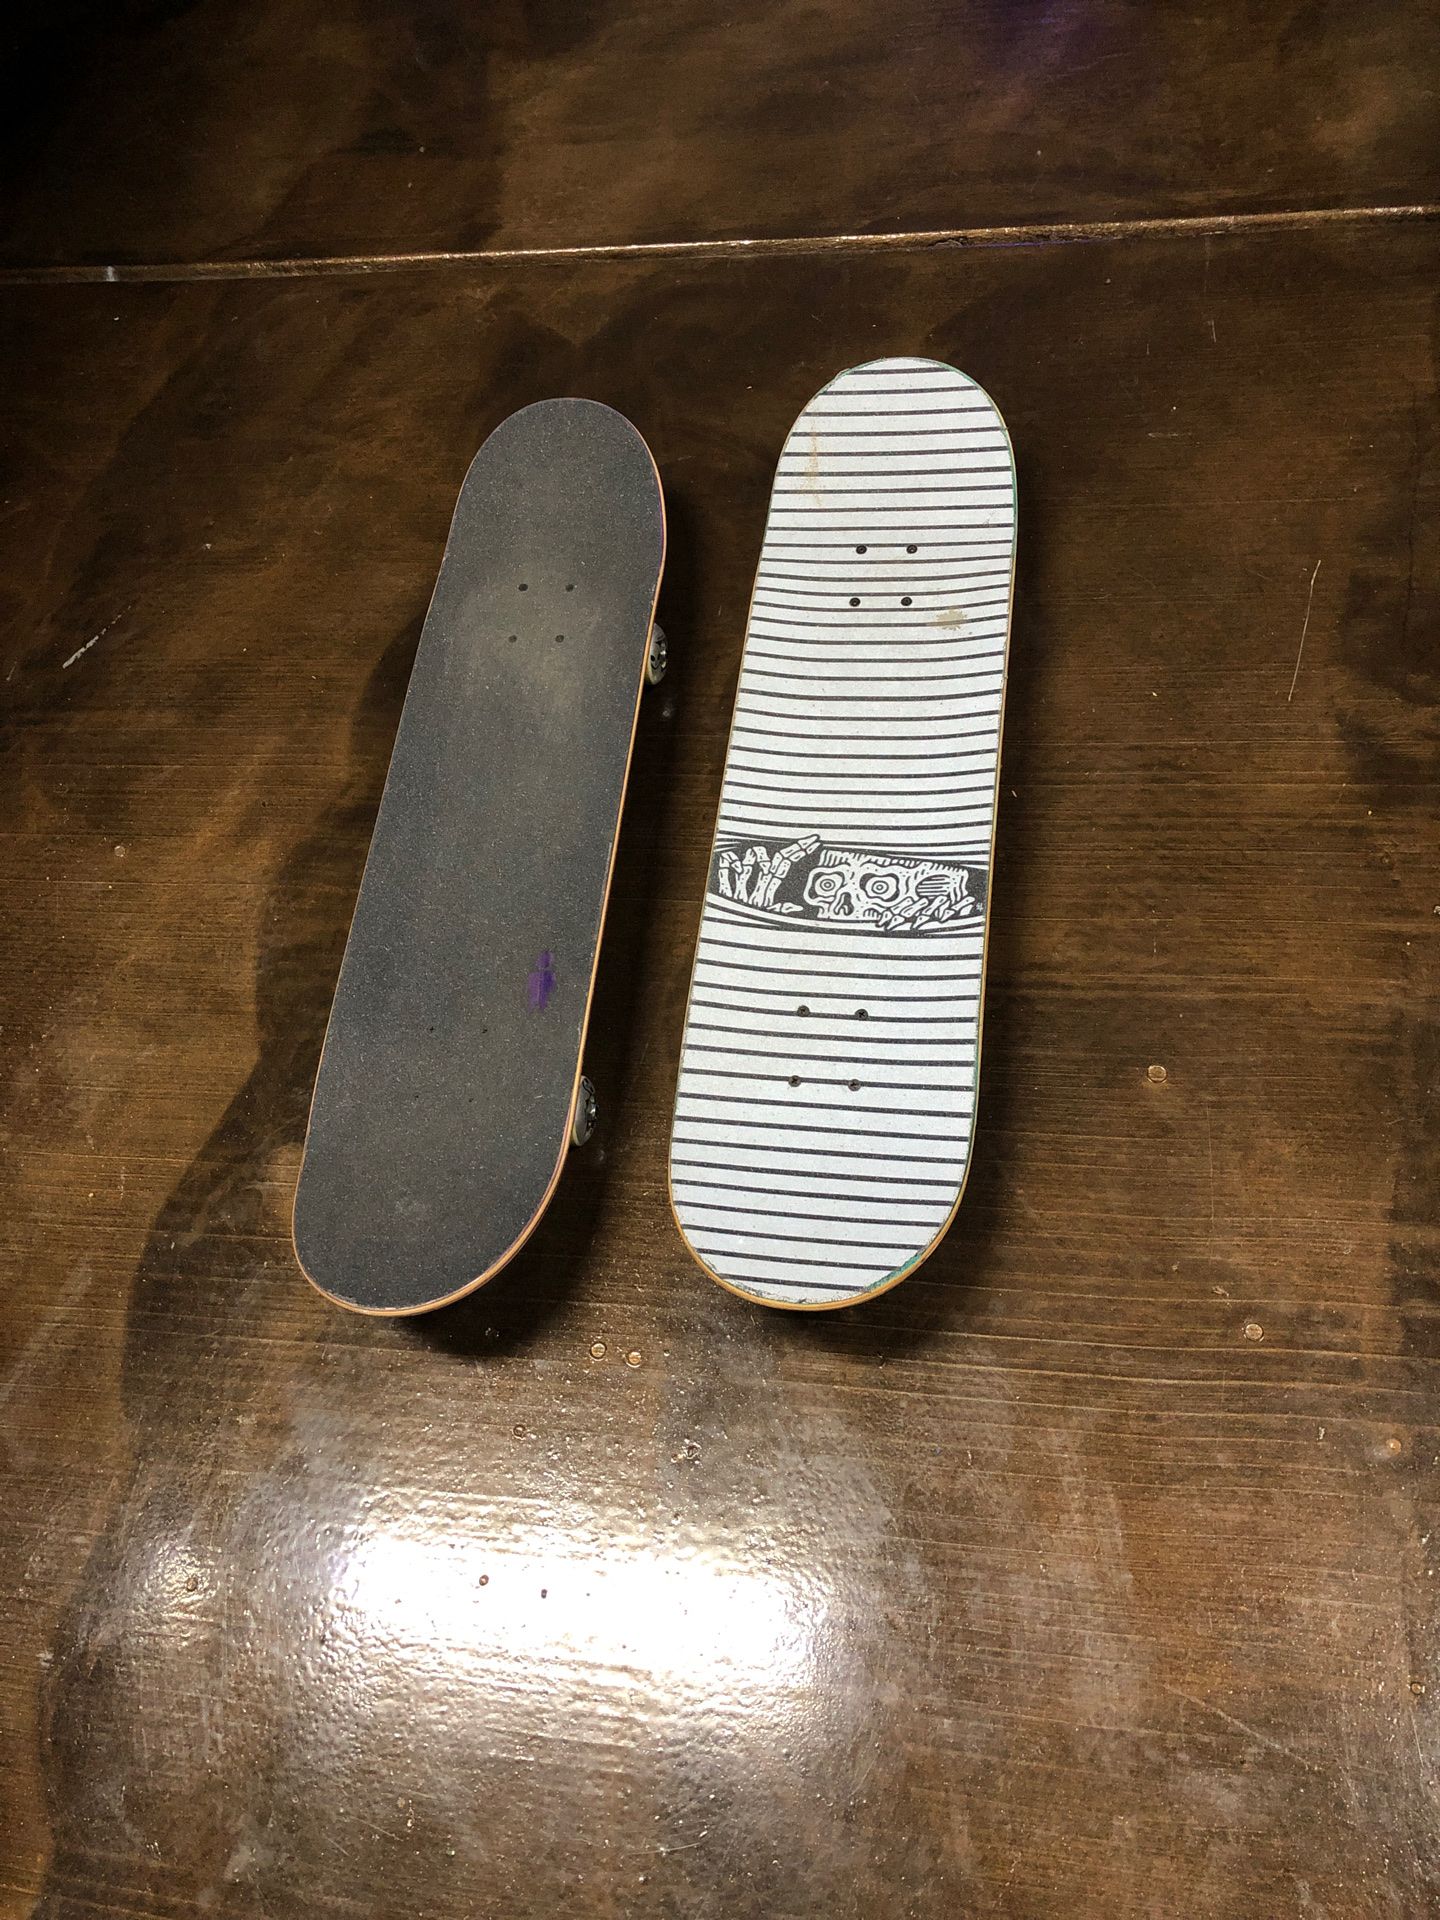 Skateboards one is custom the other is from Alien Workshop sold together as seen price